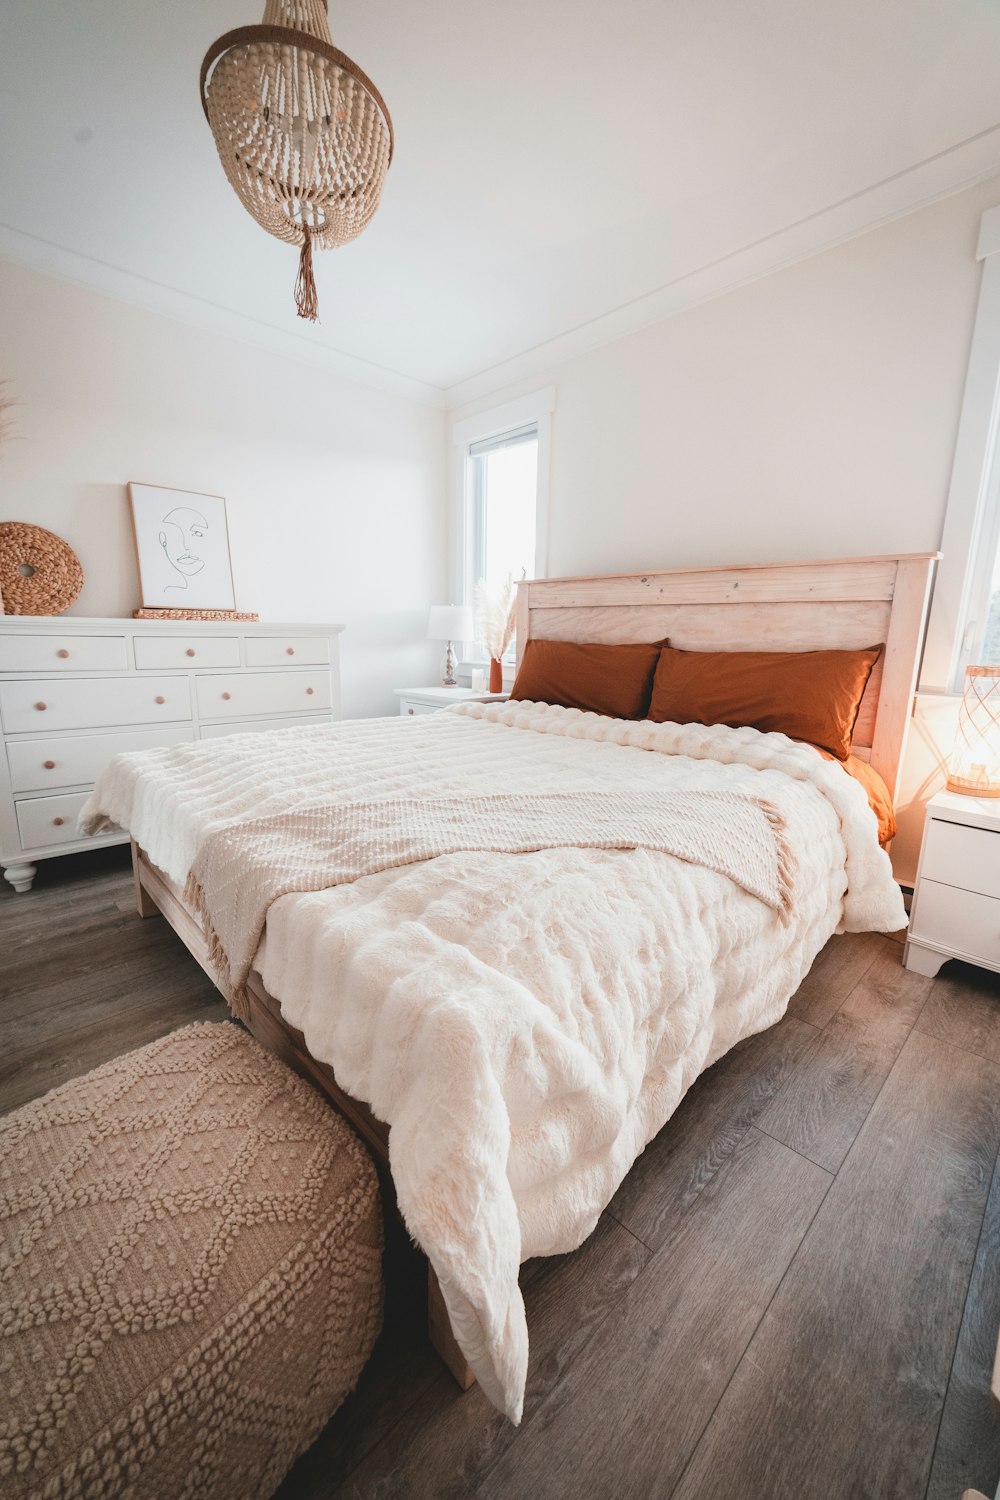 white bed linen on brown wooden bed frame